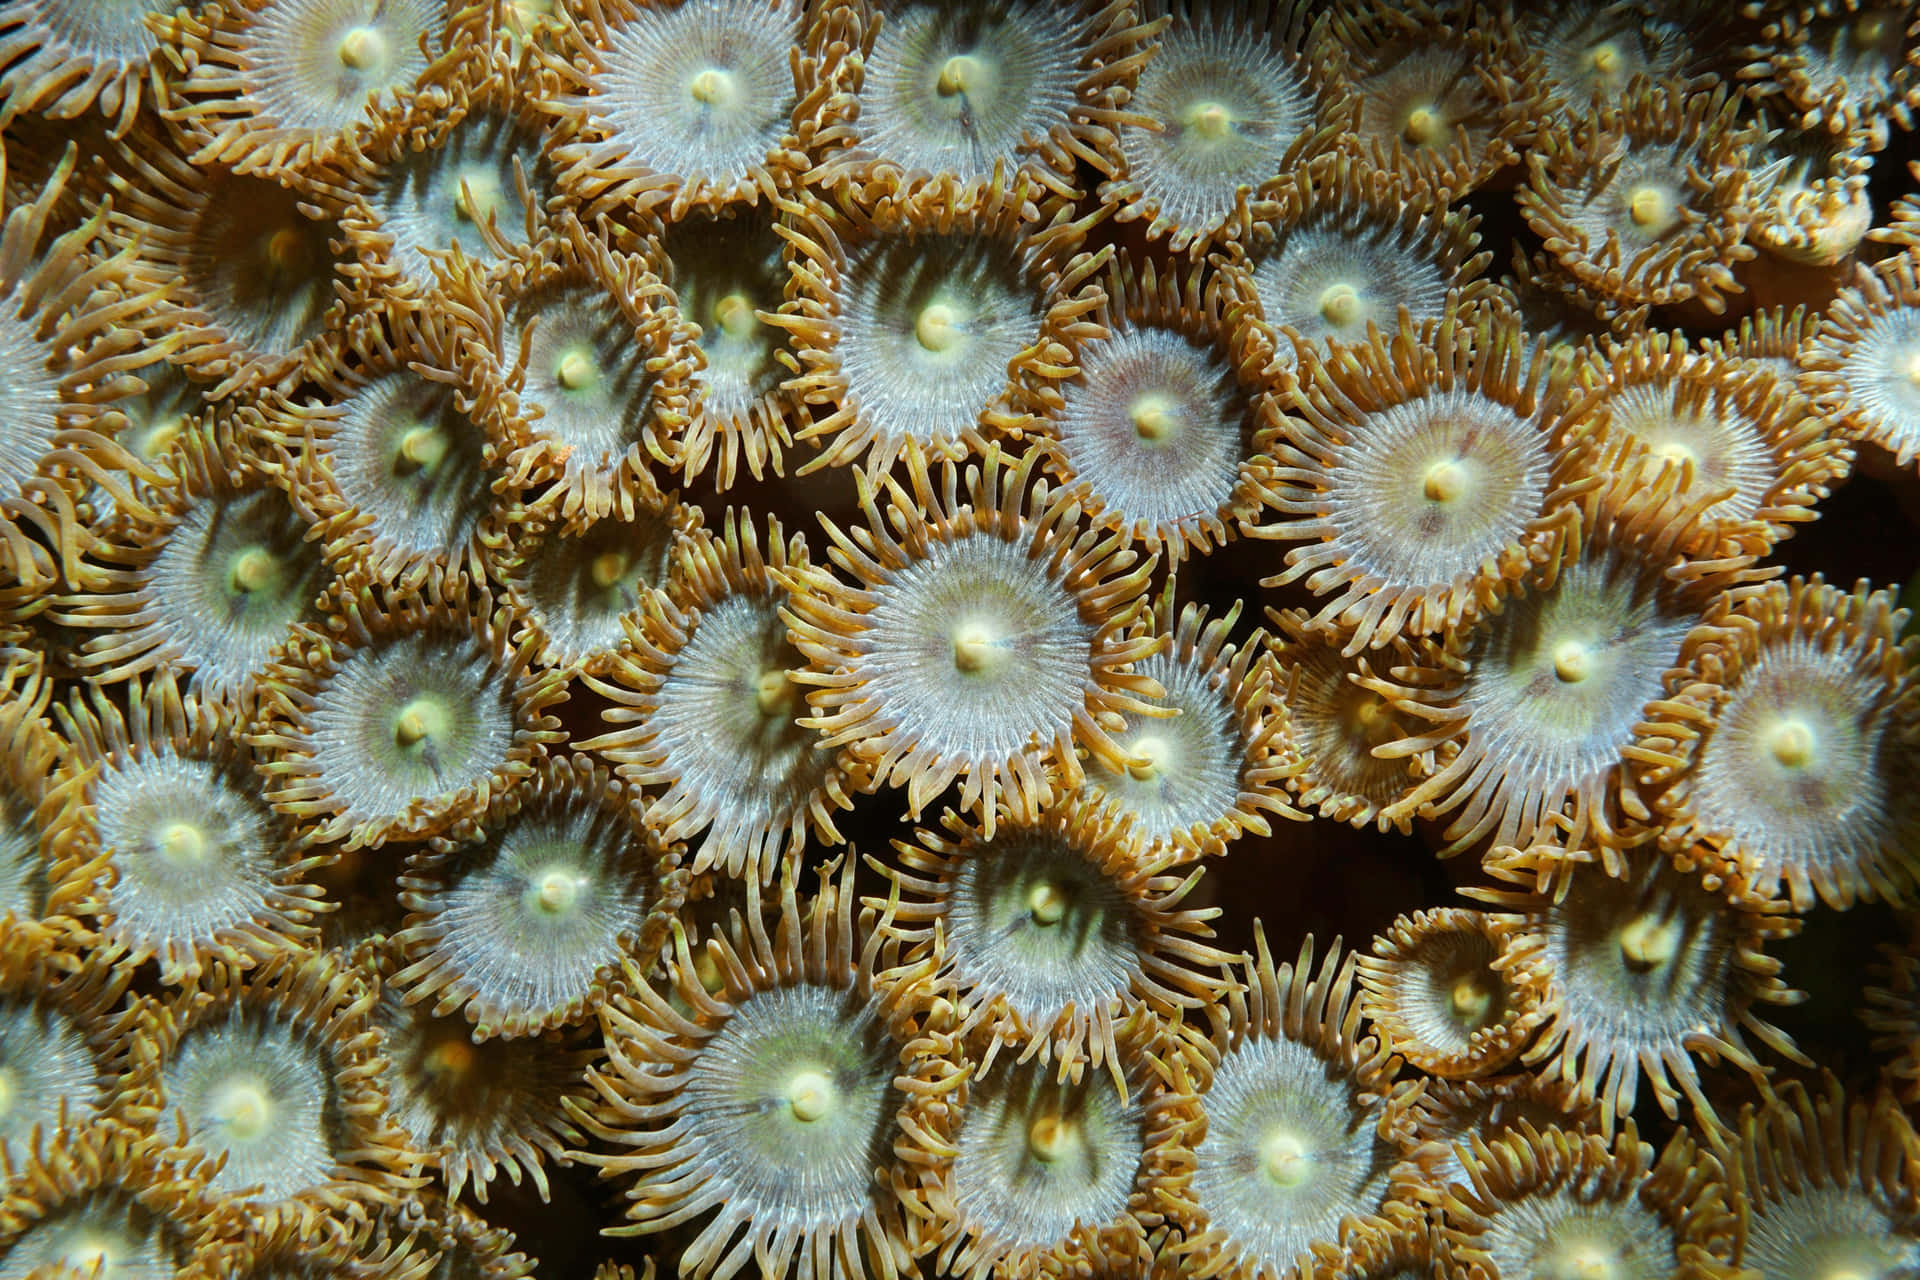 Caption: Vibrant Macro Of Colorful Zoanthid Coral Underwater Wallpaper